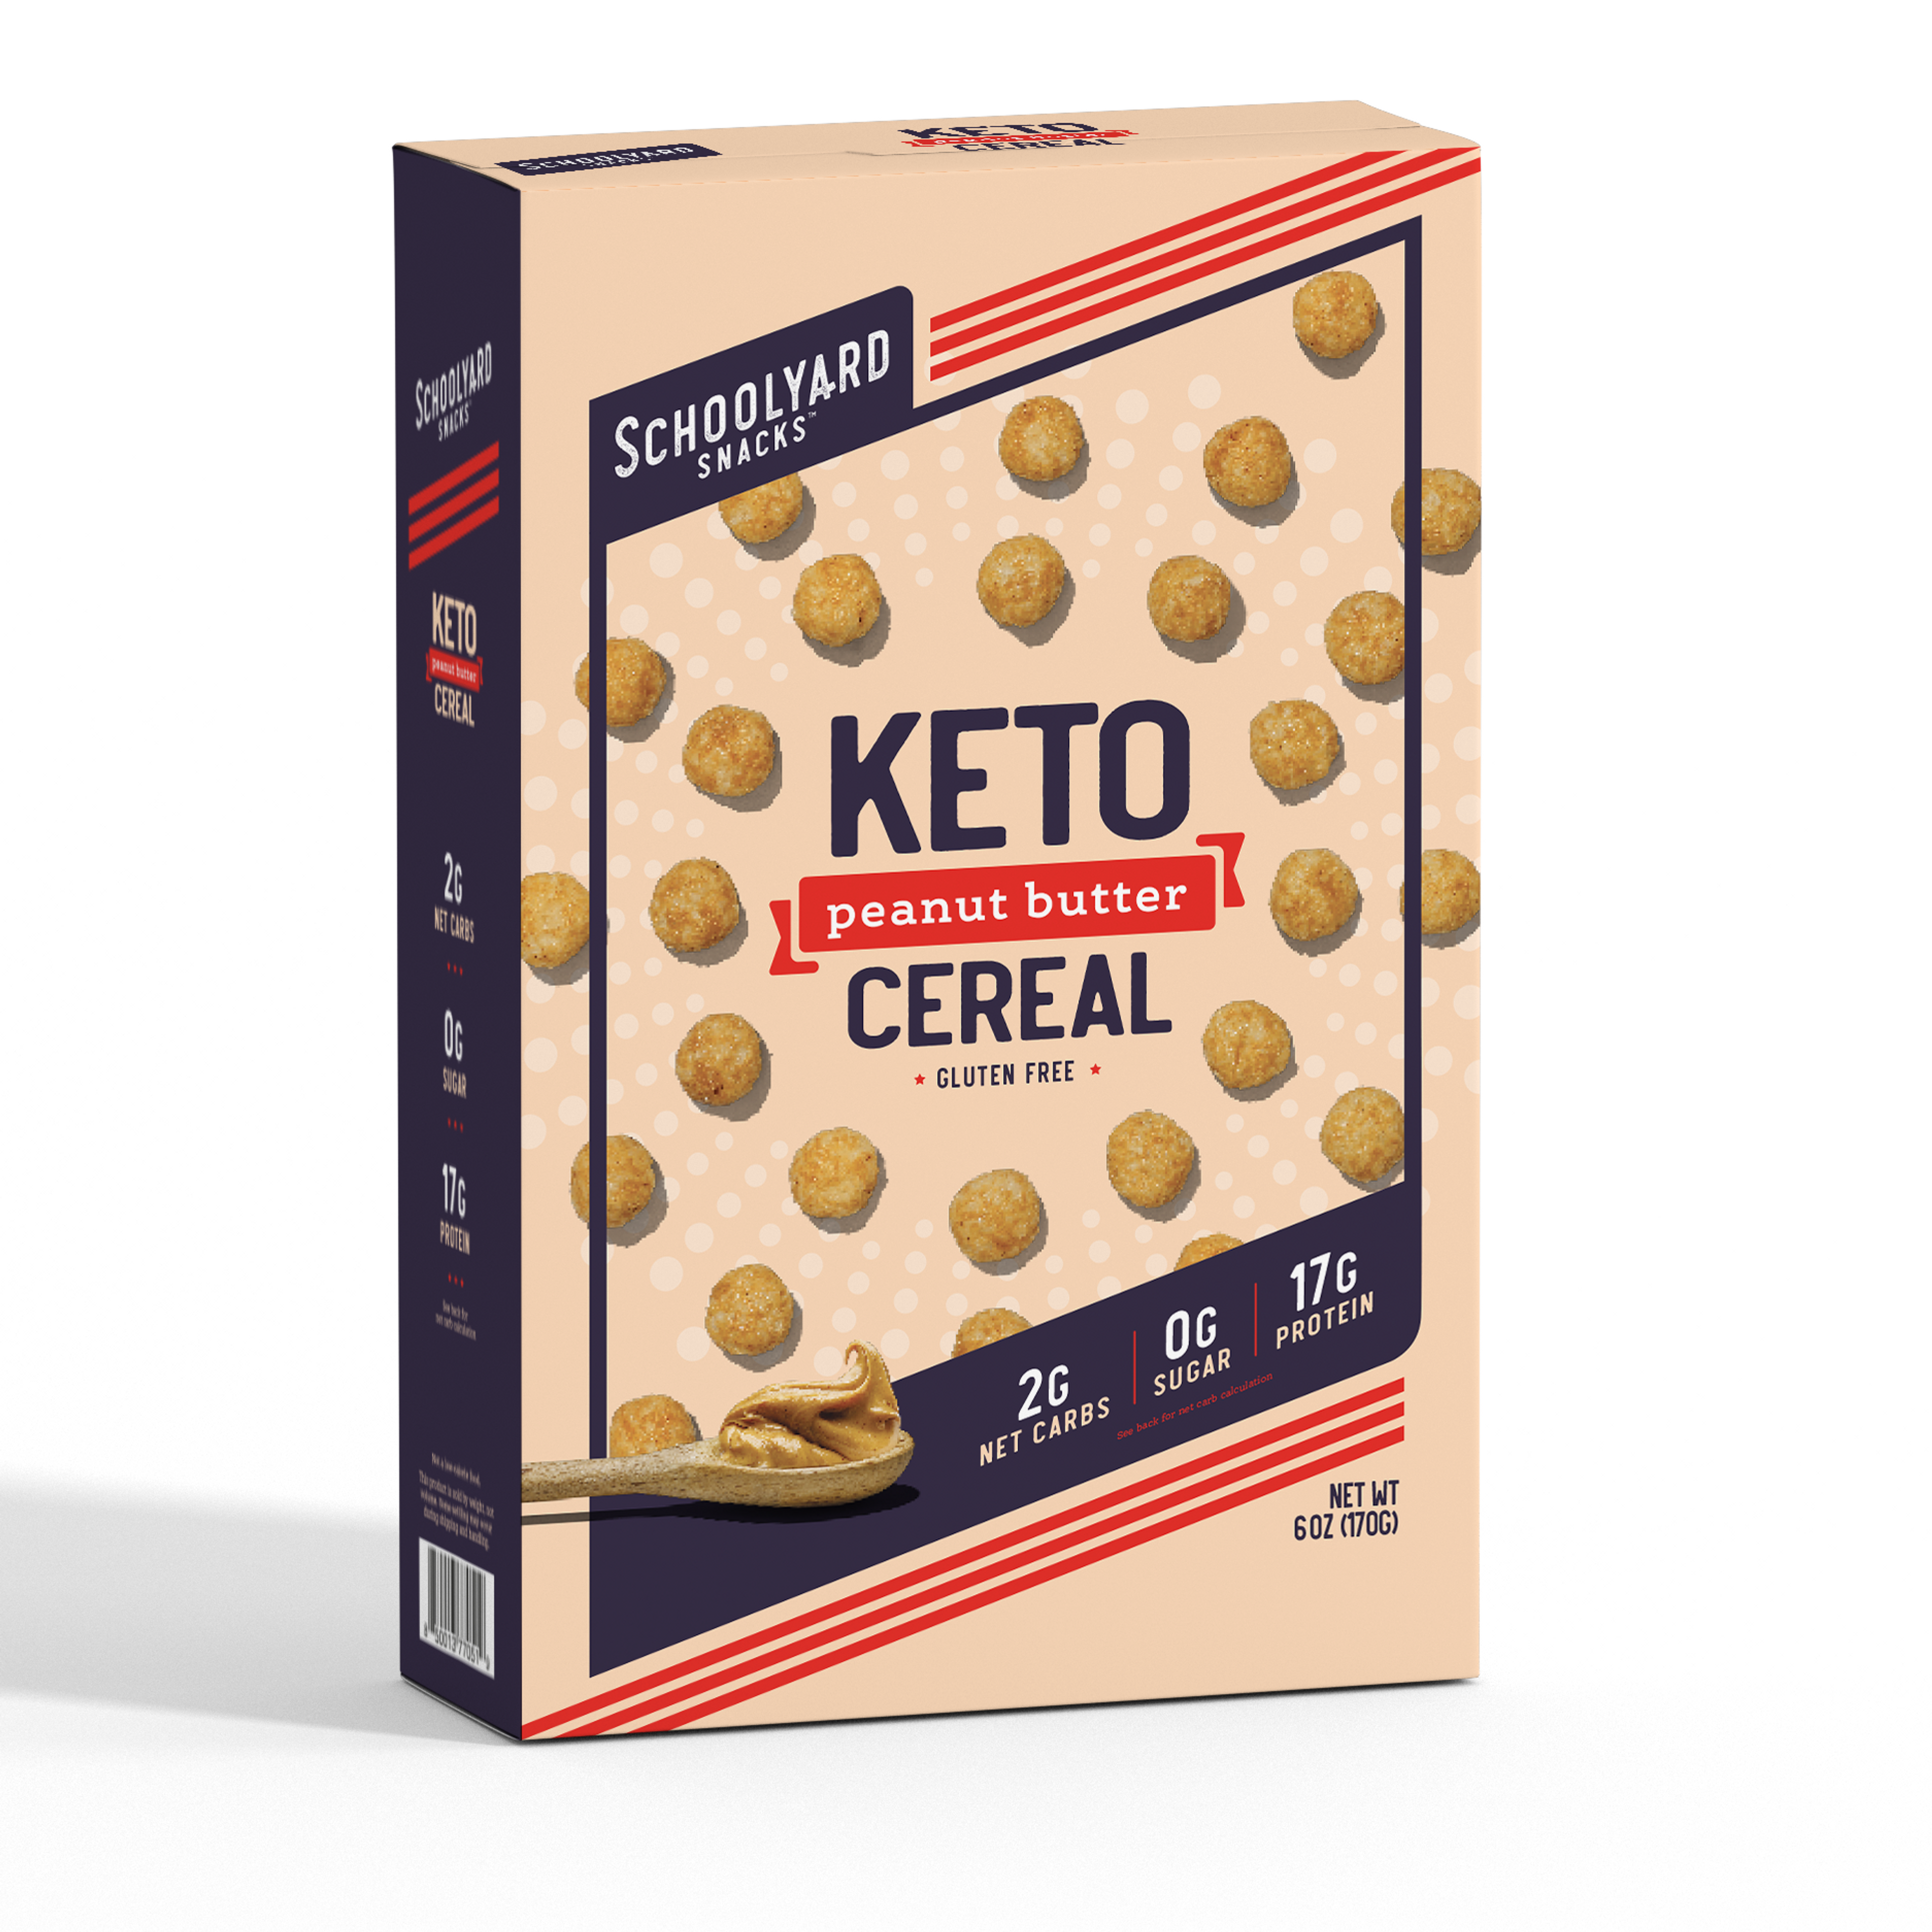 www.schoolyardsnacks.com/products/keto-cereal-6-boxes